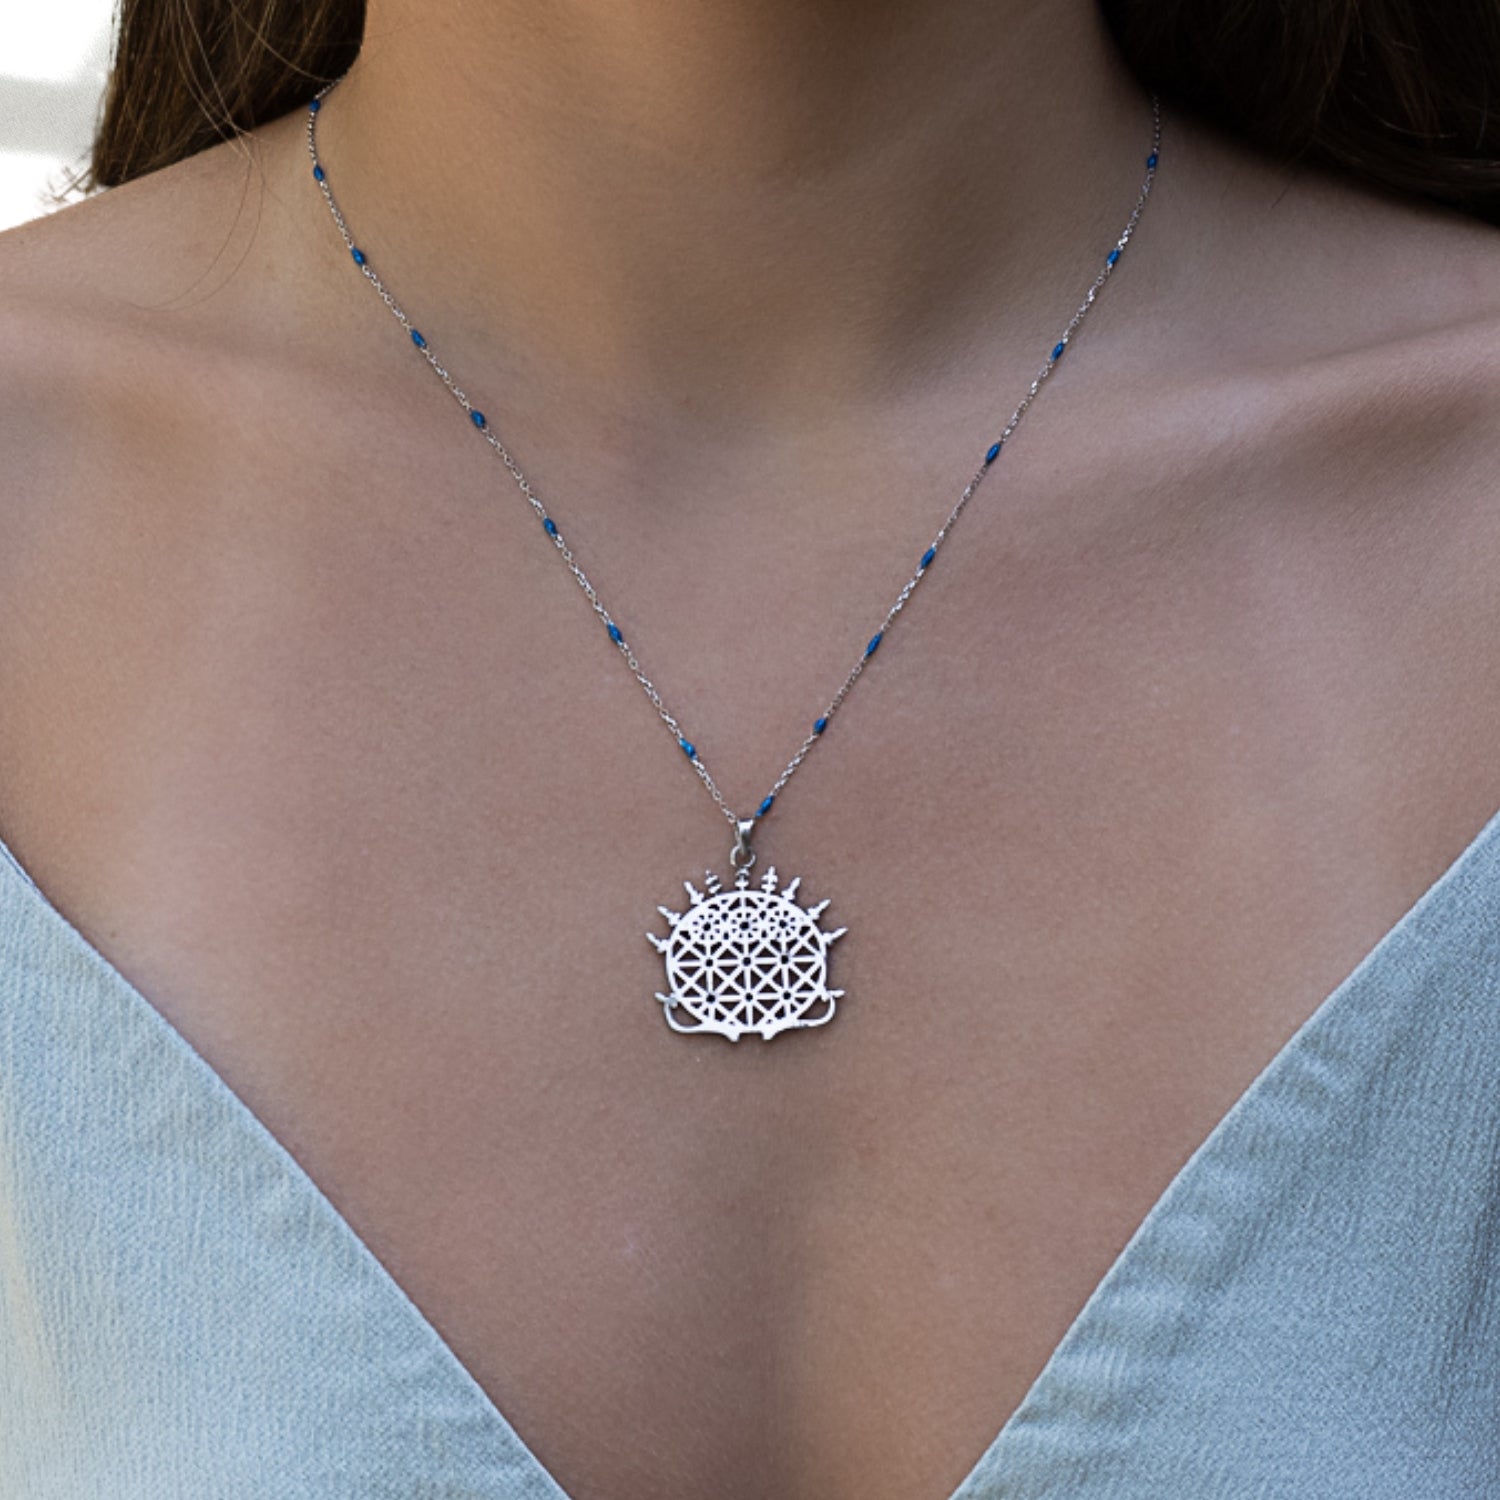 Enhance your look with the Hittite Sun Disk Necklace, as seen on our model showcasing its beauty and elegance.